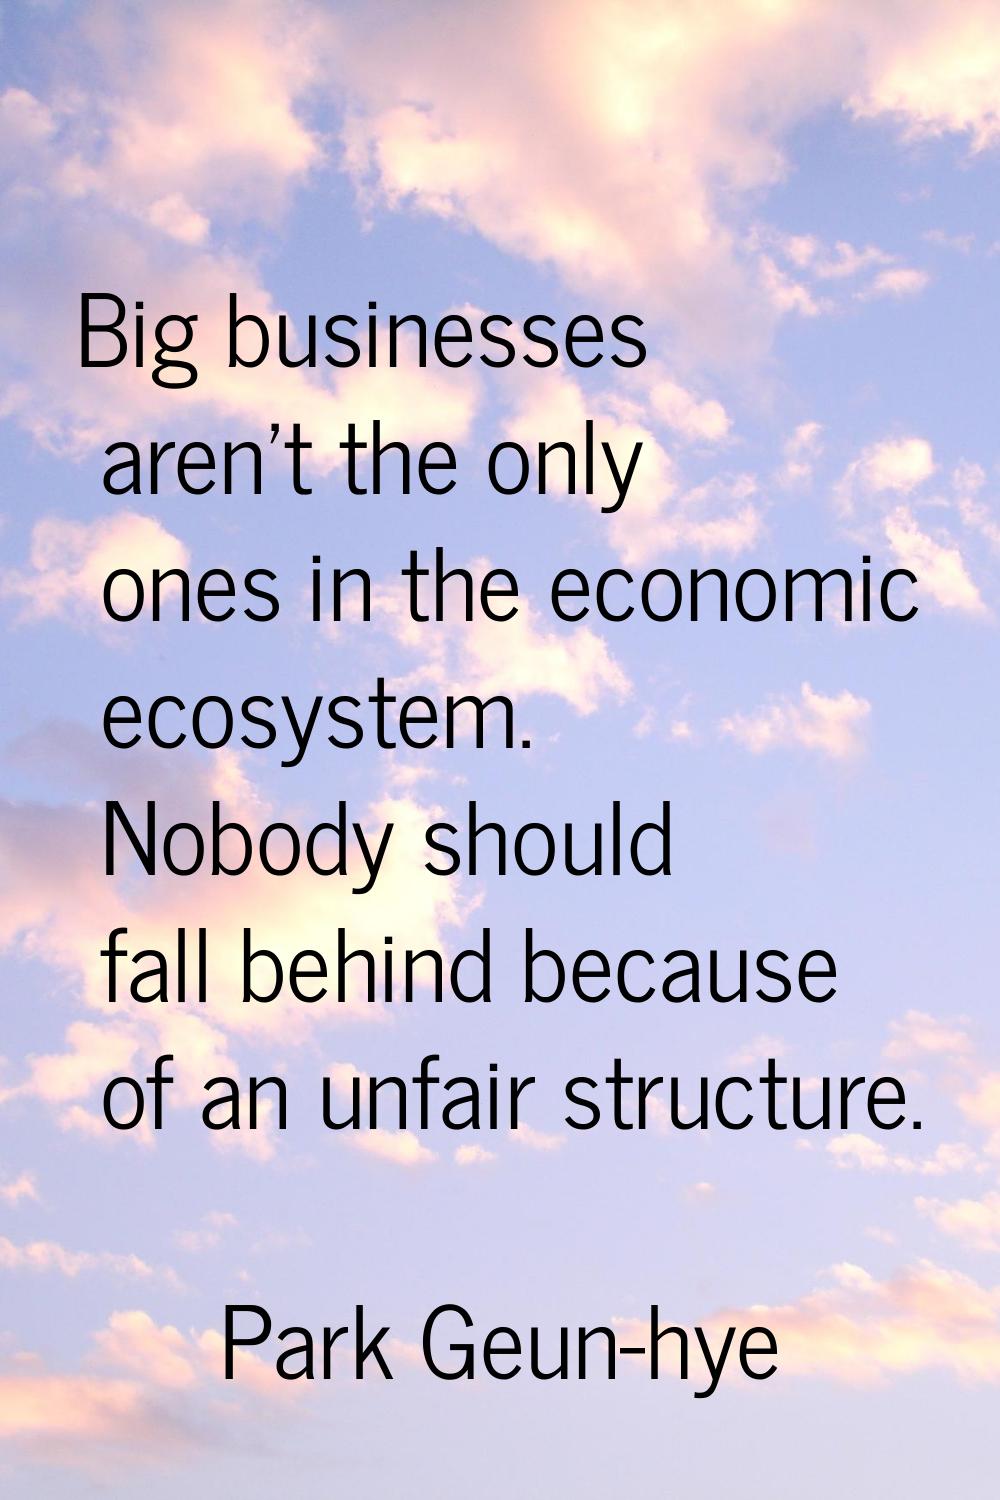 Big businesses aren't the only ones in the economic ecosystem. Nobody should fall behind because of